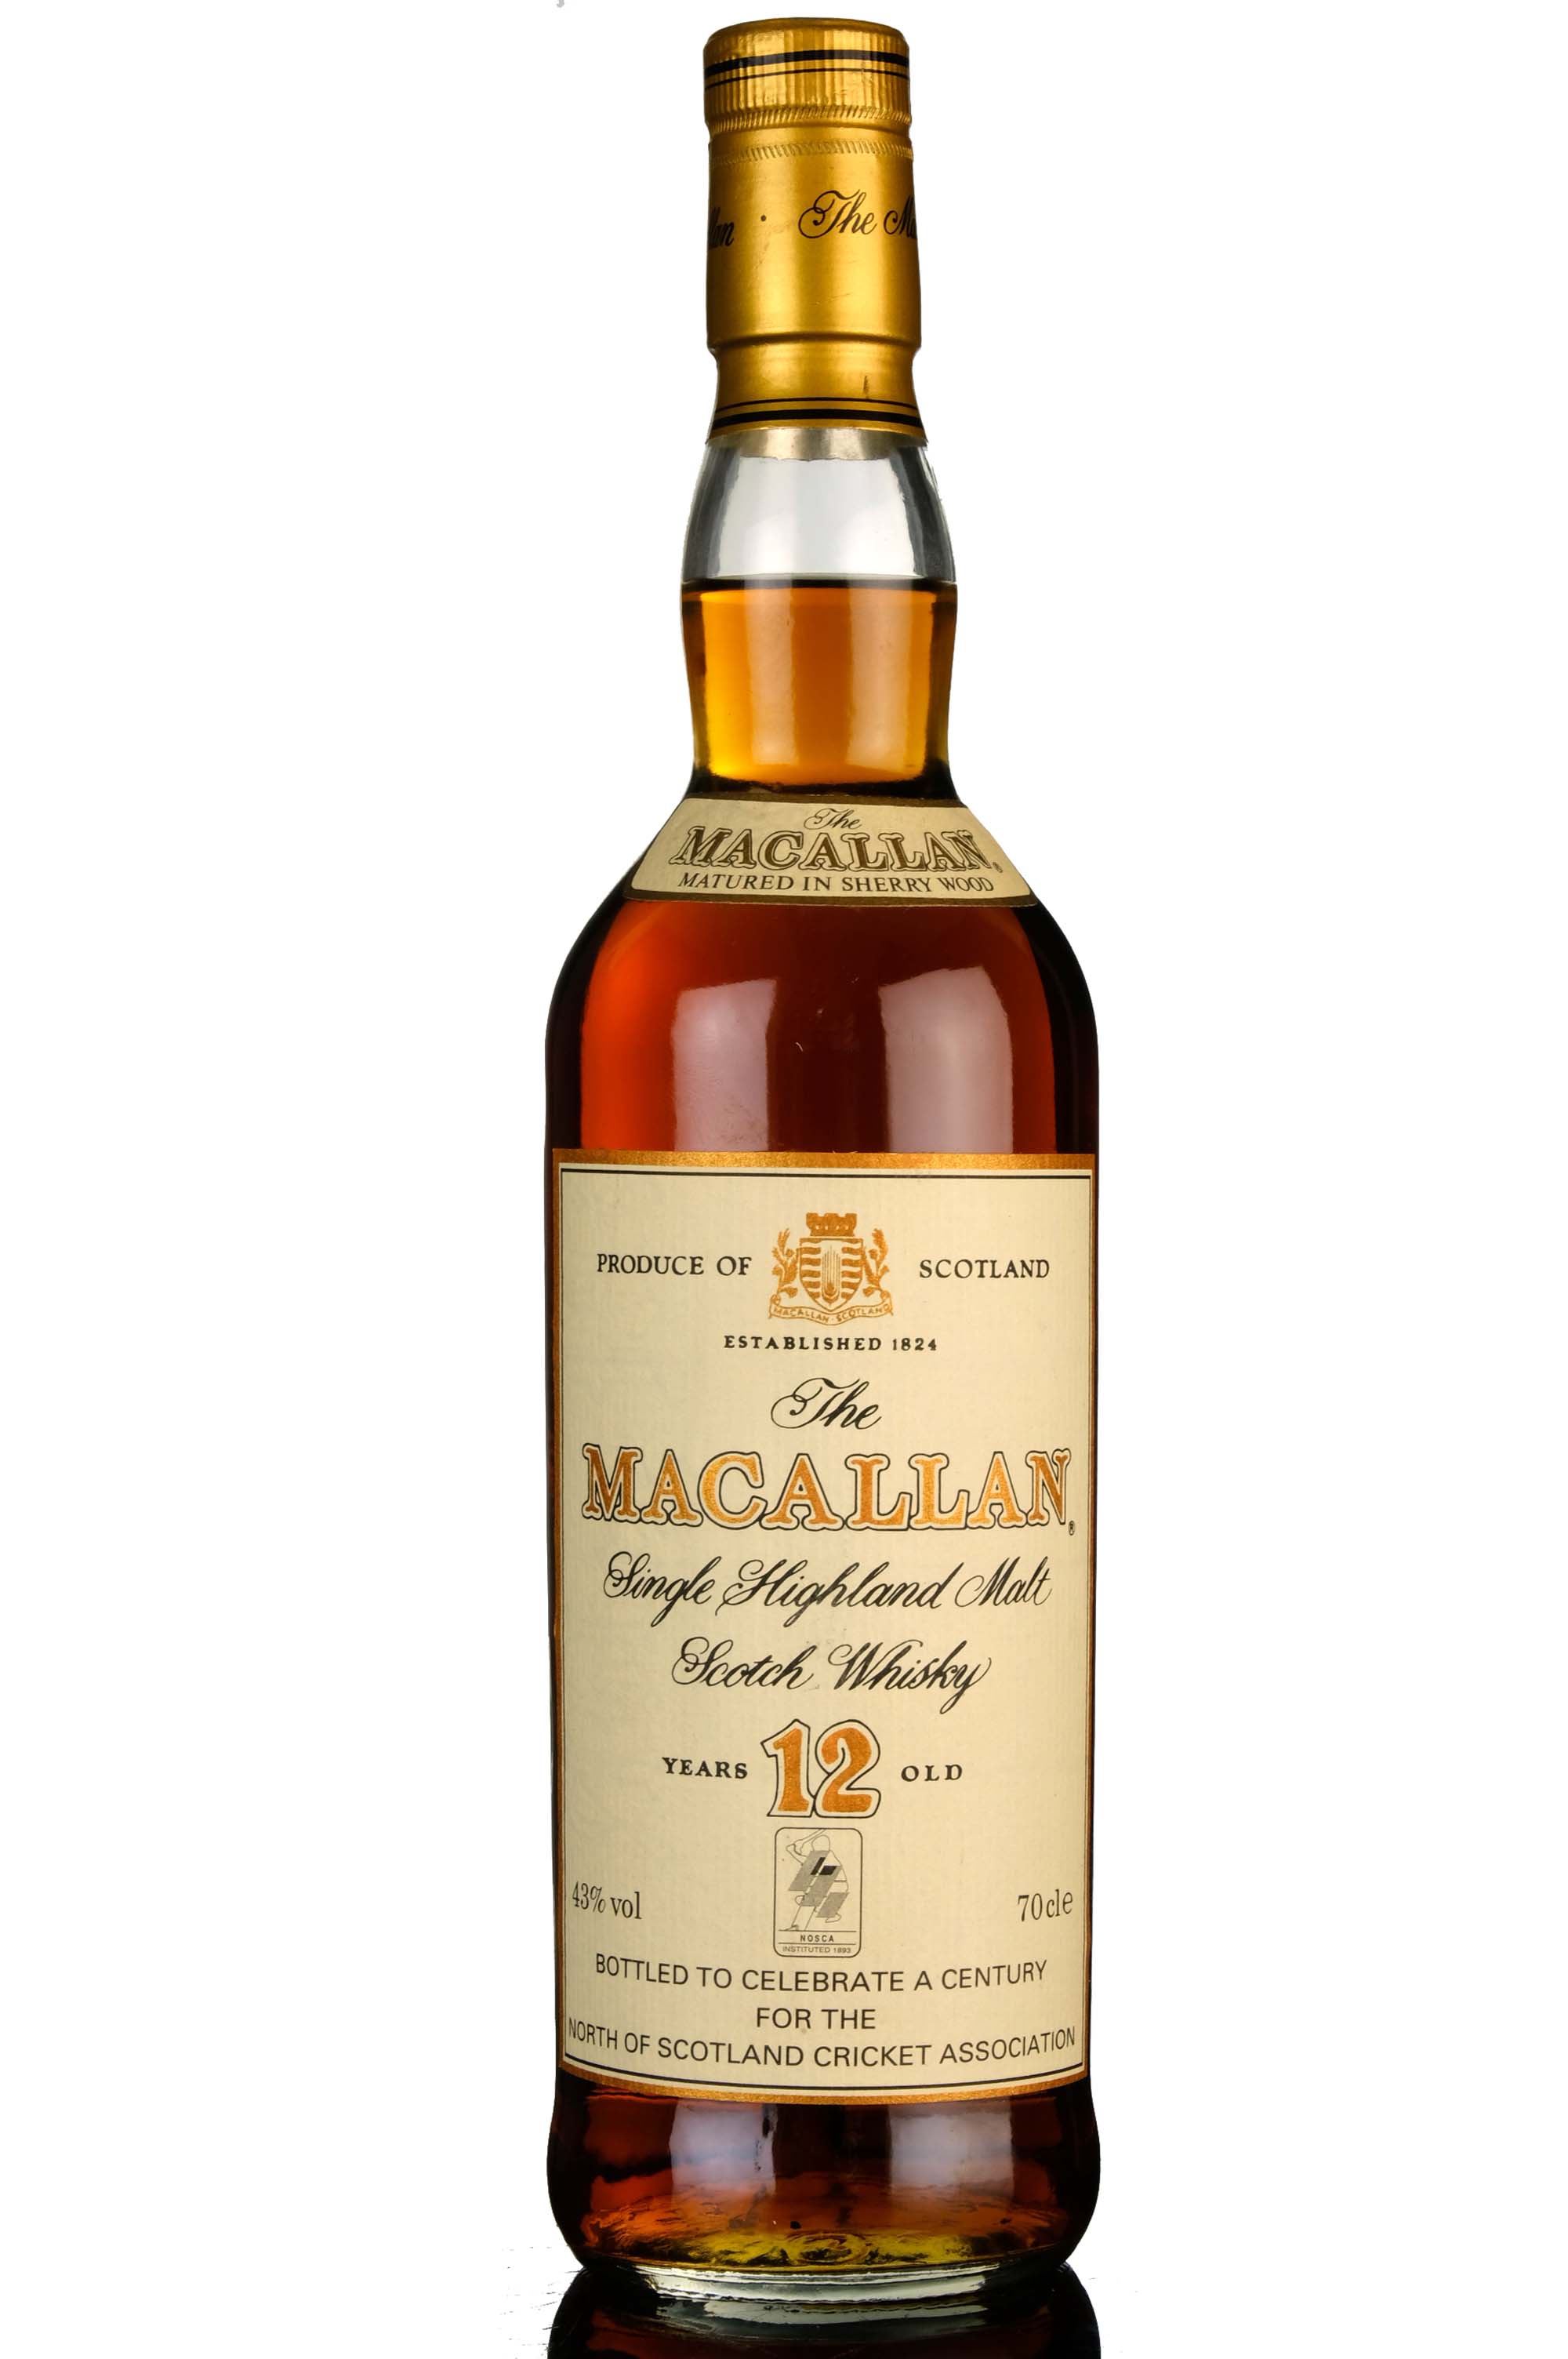 Macallan 12 Year Old - Sherry Cask - 1990s - North Of Scotland Cricket Association